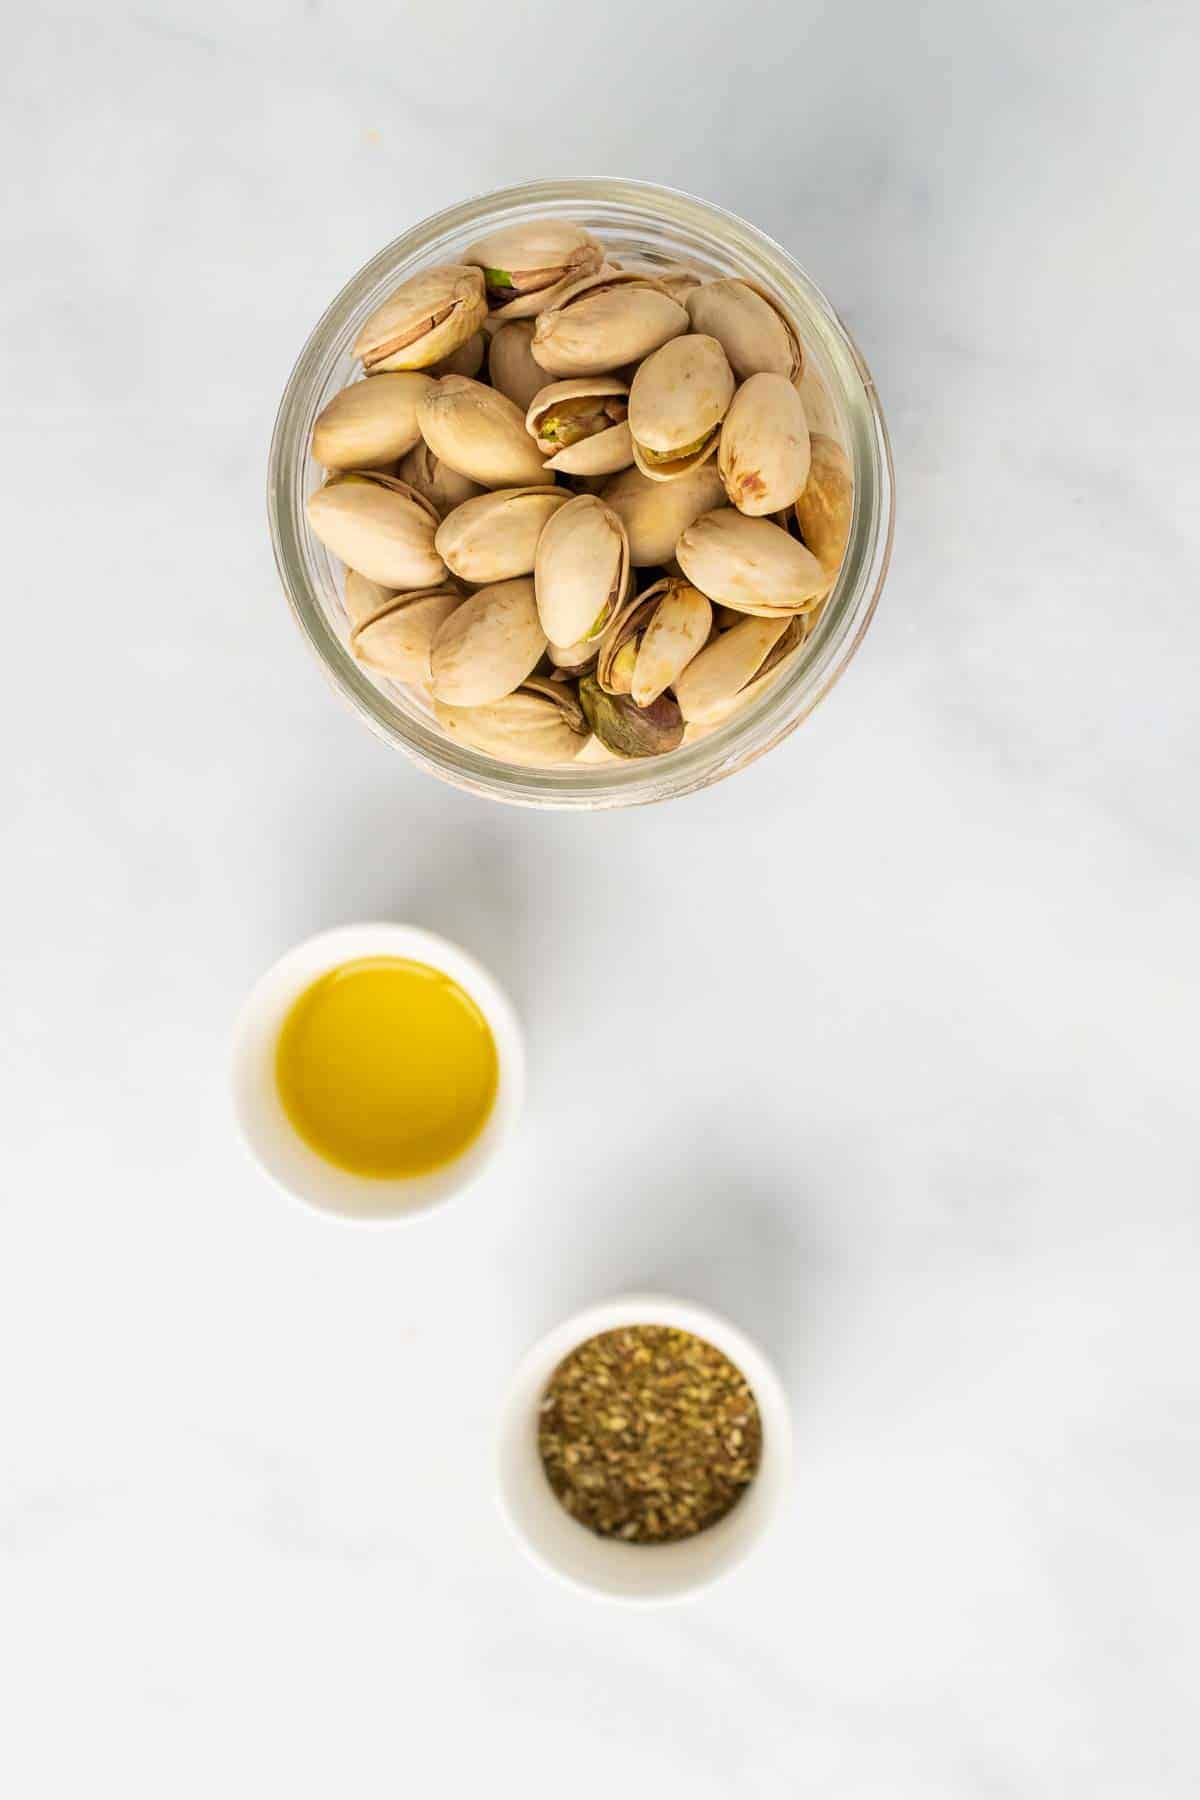 Pistachios, oil, and spices in individual ramekins